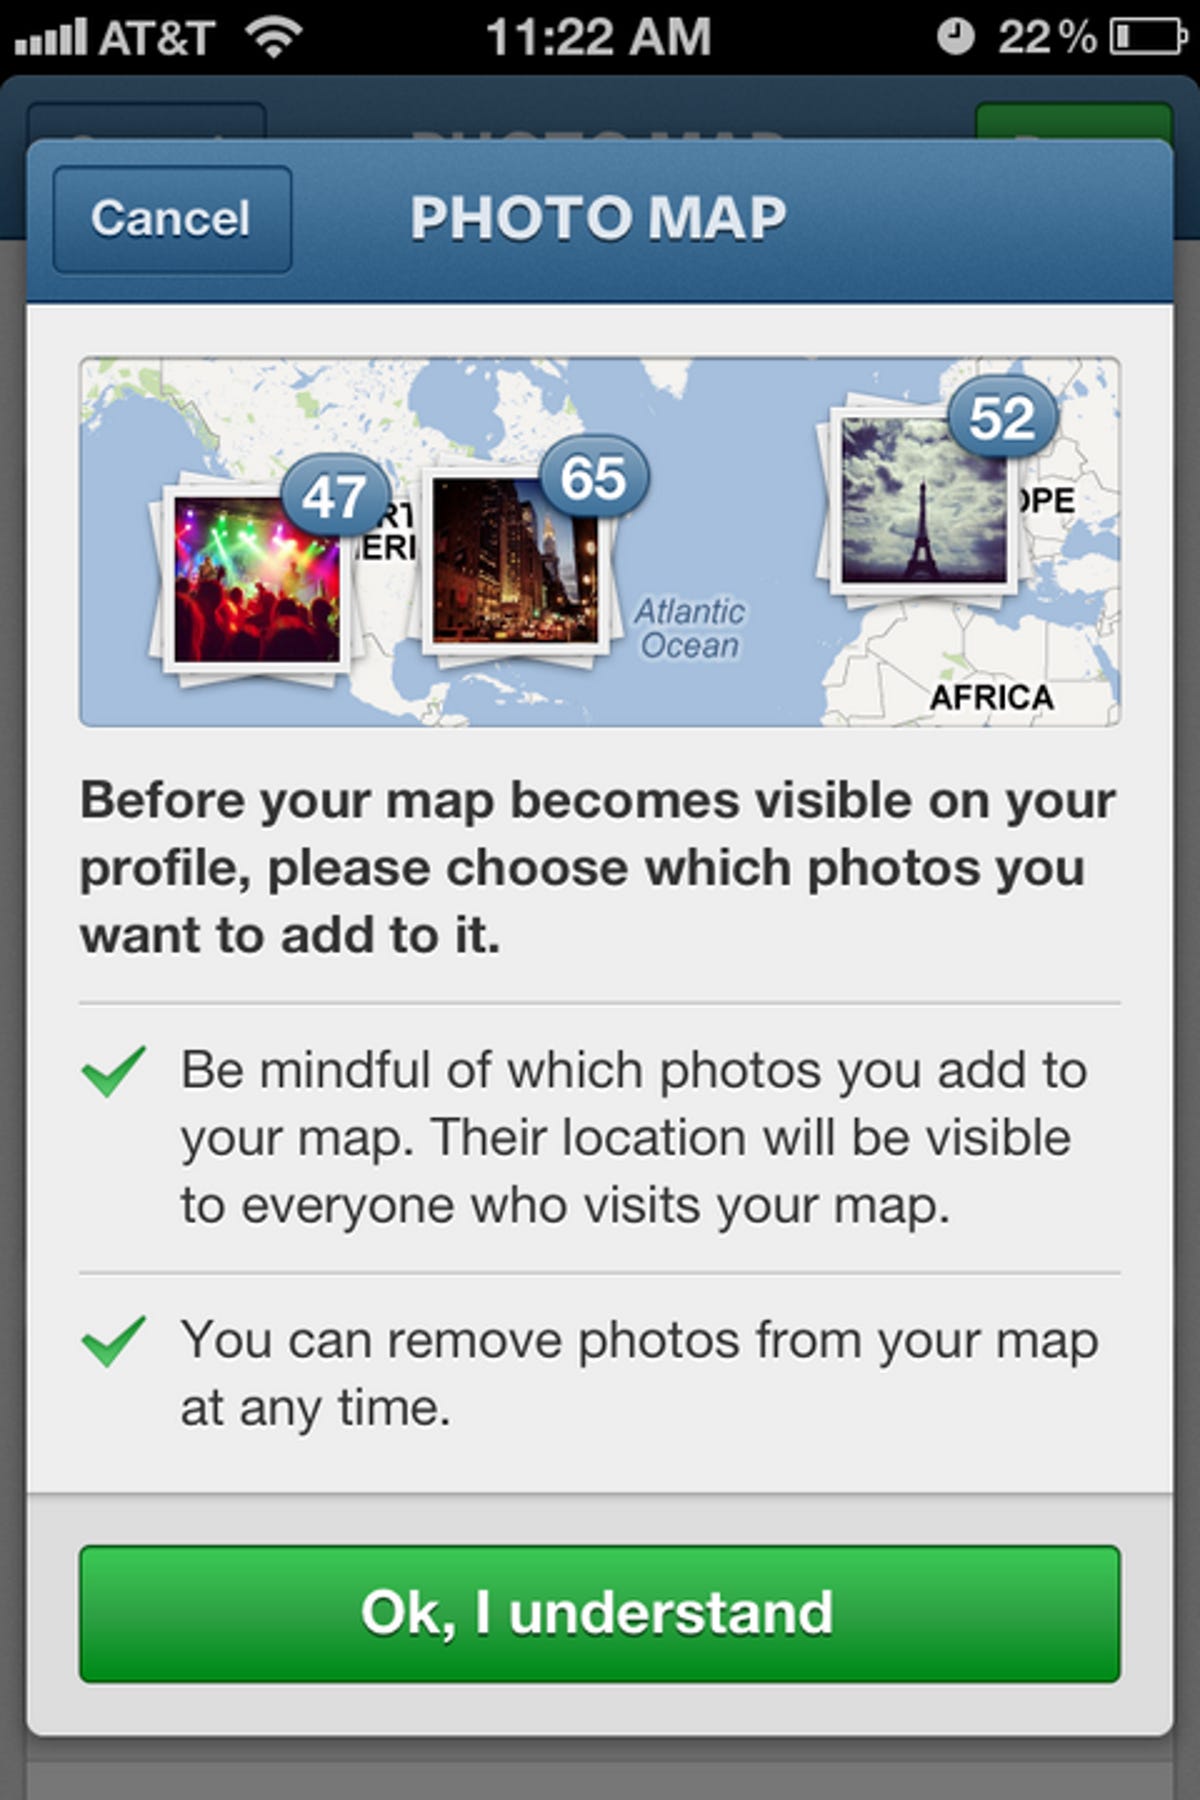 InstagramPhotoMapInstructions.png